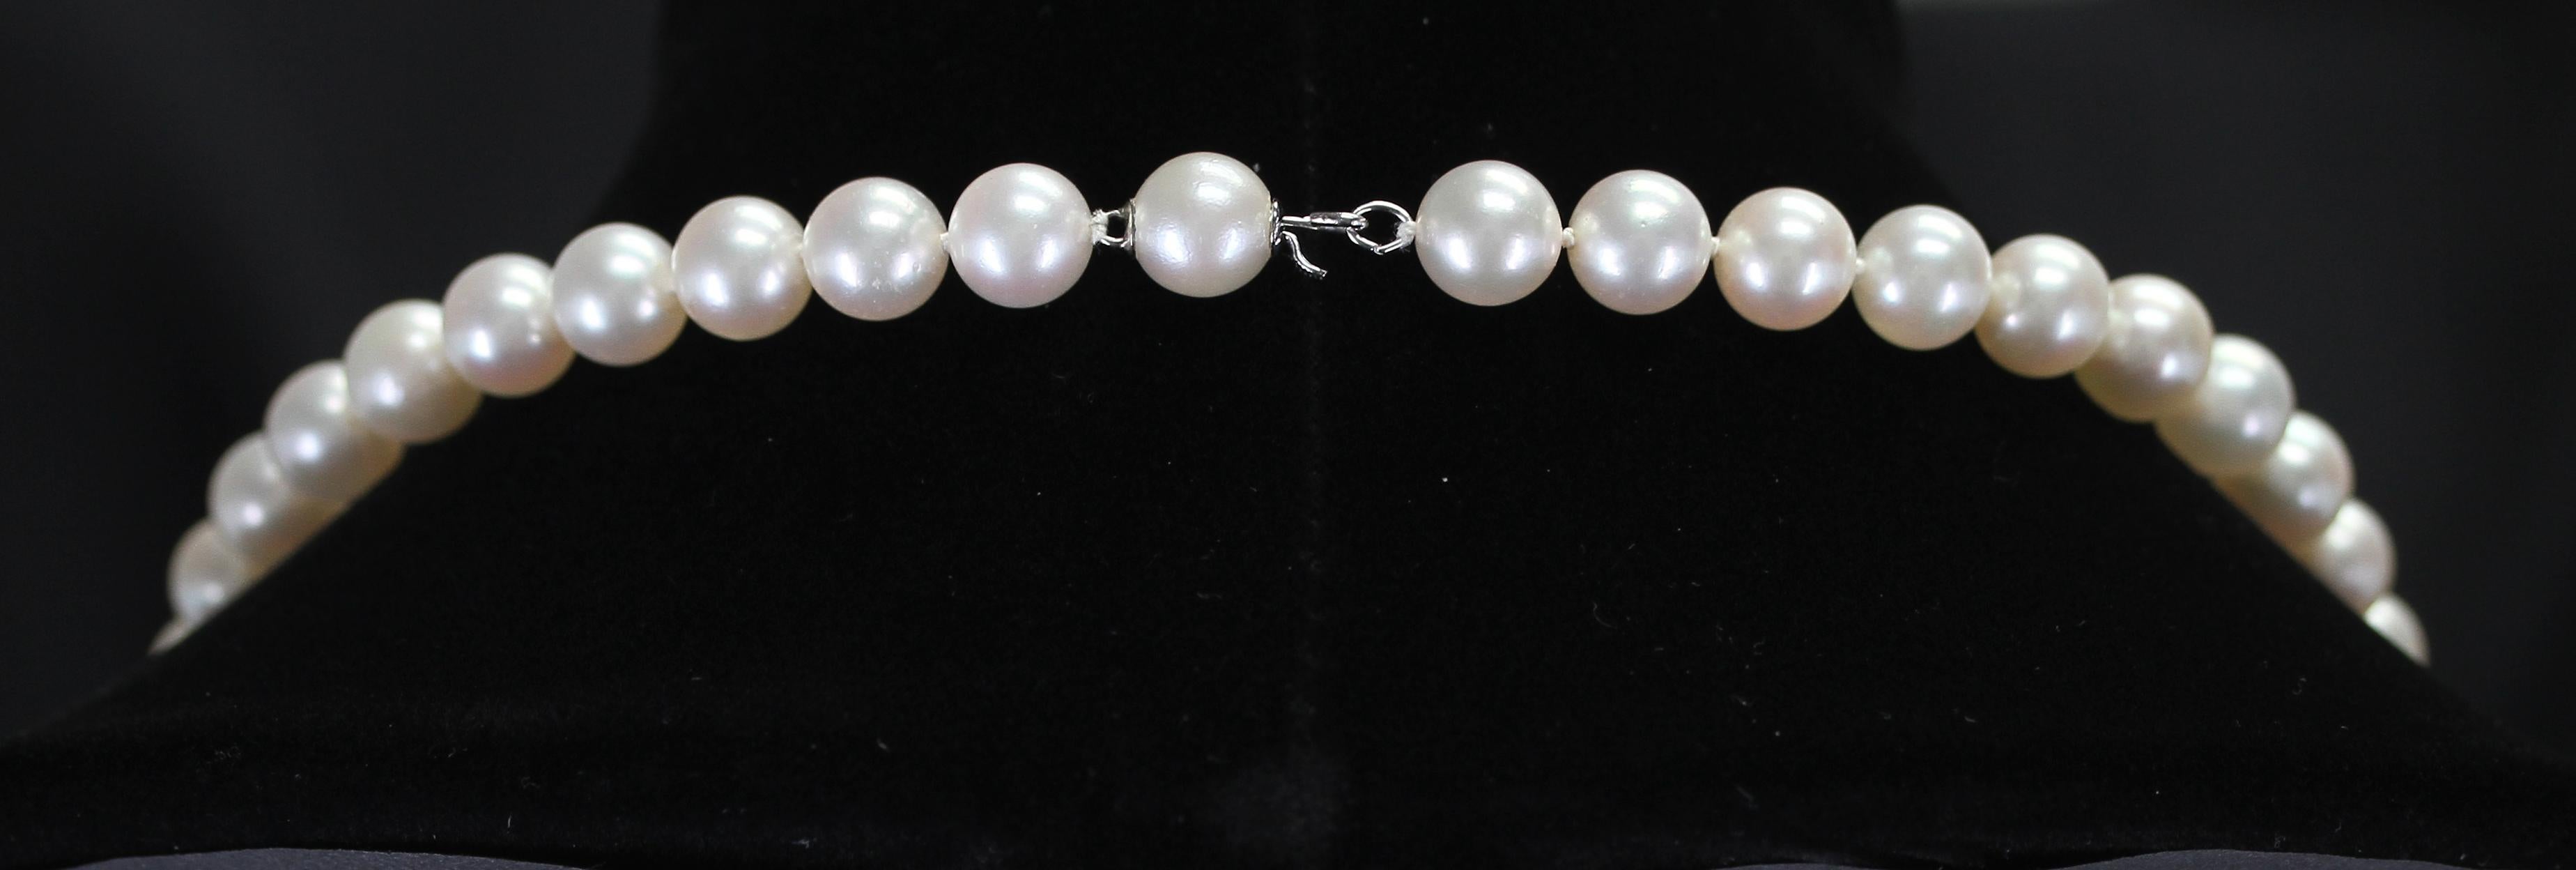 A classic strand of smooth cultured pearls necklace with a pearl clasp that blends in. Length: 22 Inches, Range: 8MM, Weight: 257 cts